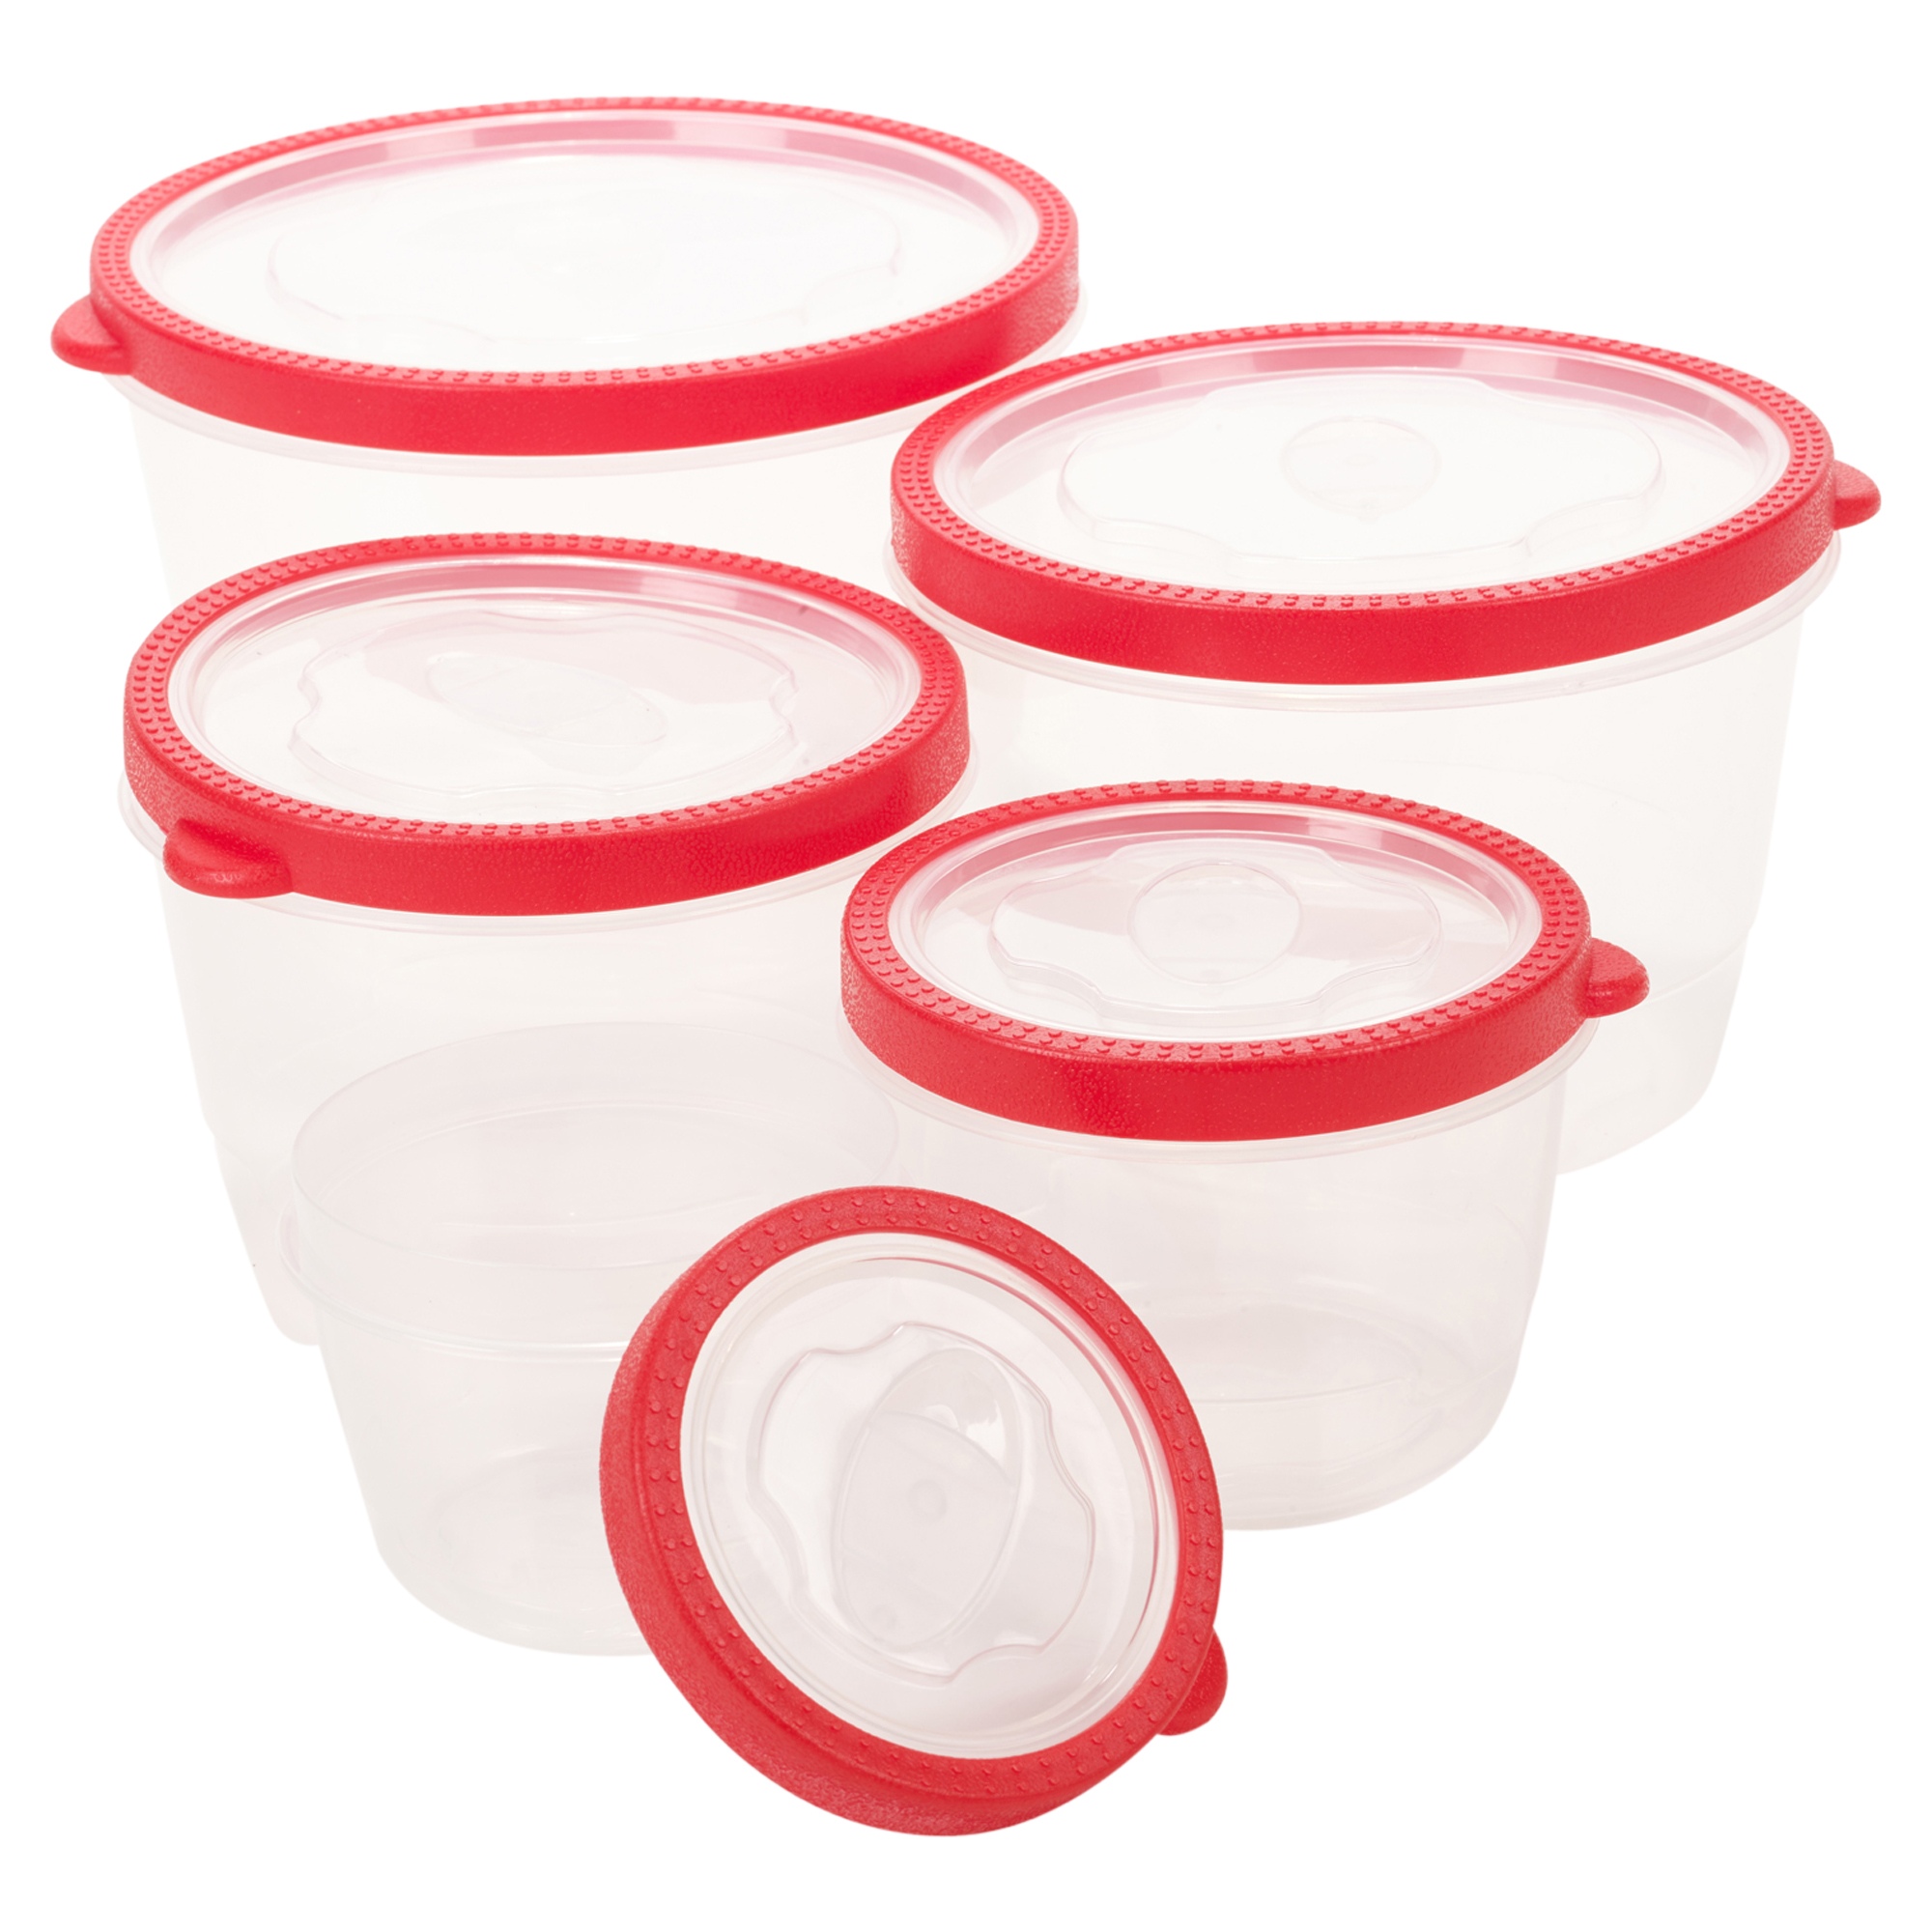 5 Plastic Food Storage Box Containers & Lids Set Microwave Dishwasher